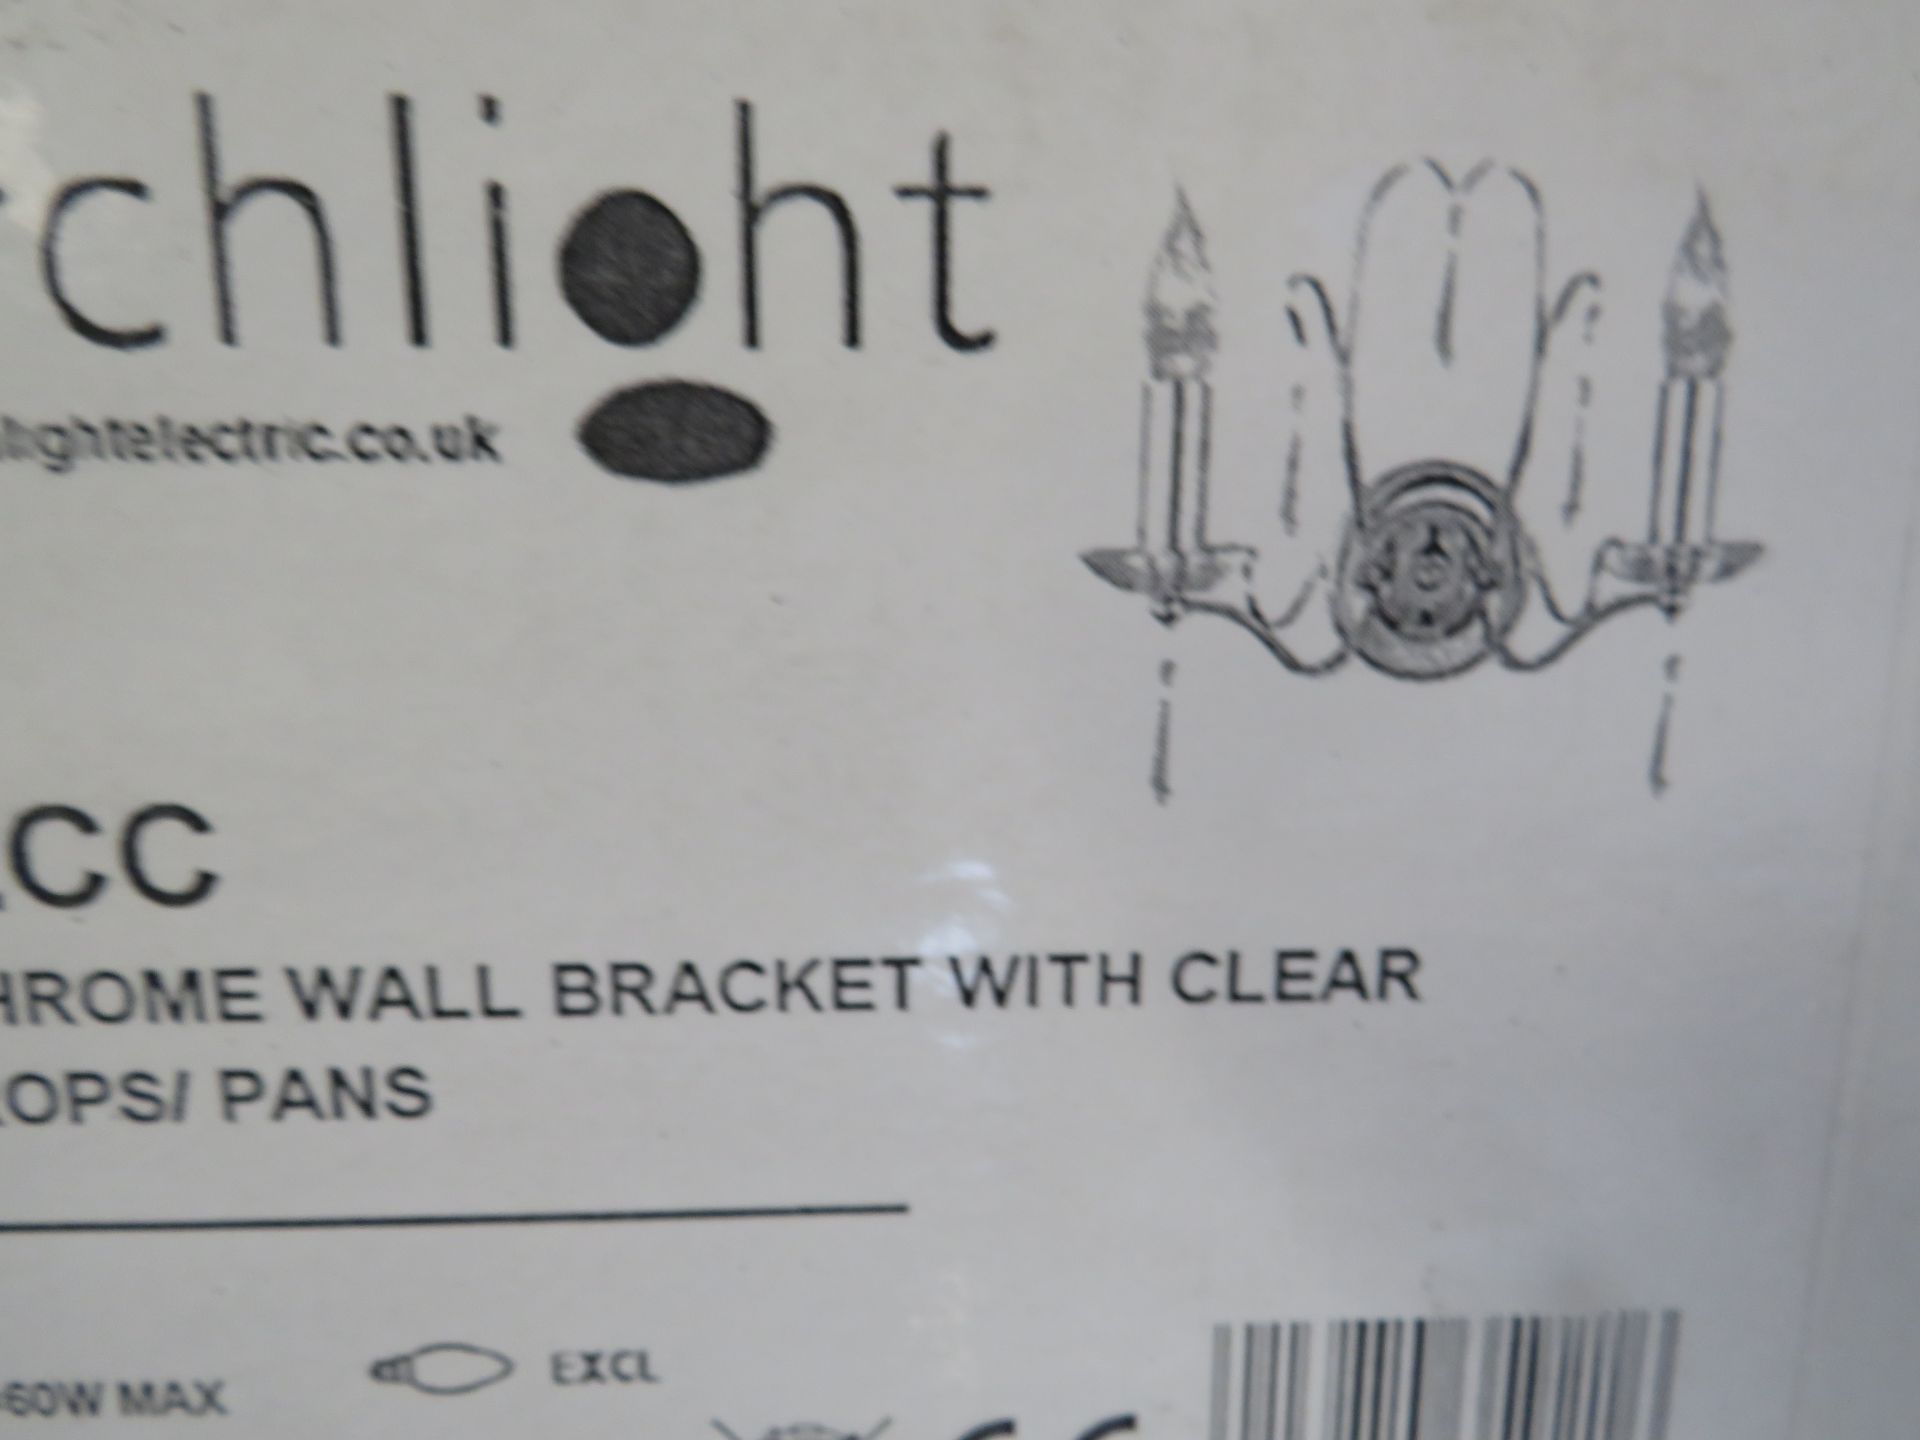 Searchlight Tiara 2 Light Wall Bracket In Chrome RRP ô?68.00 - This lot contains unsorted raw